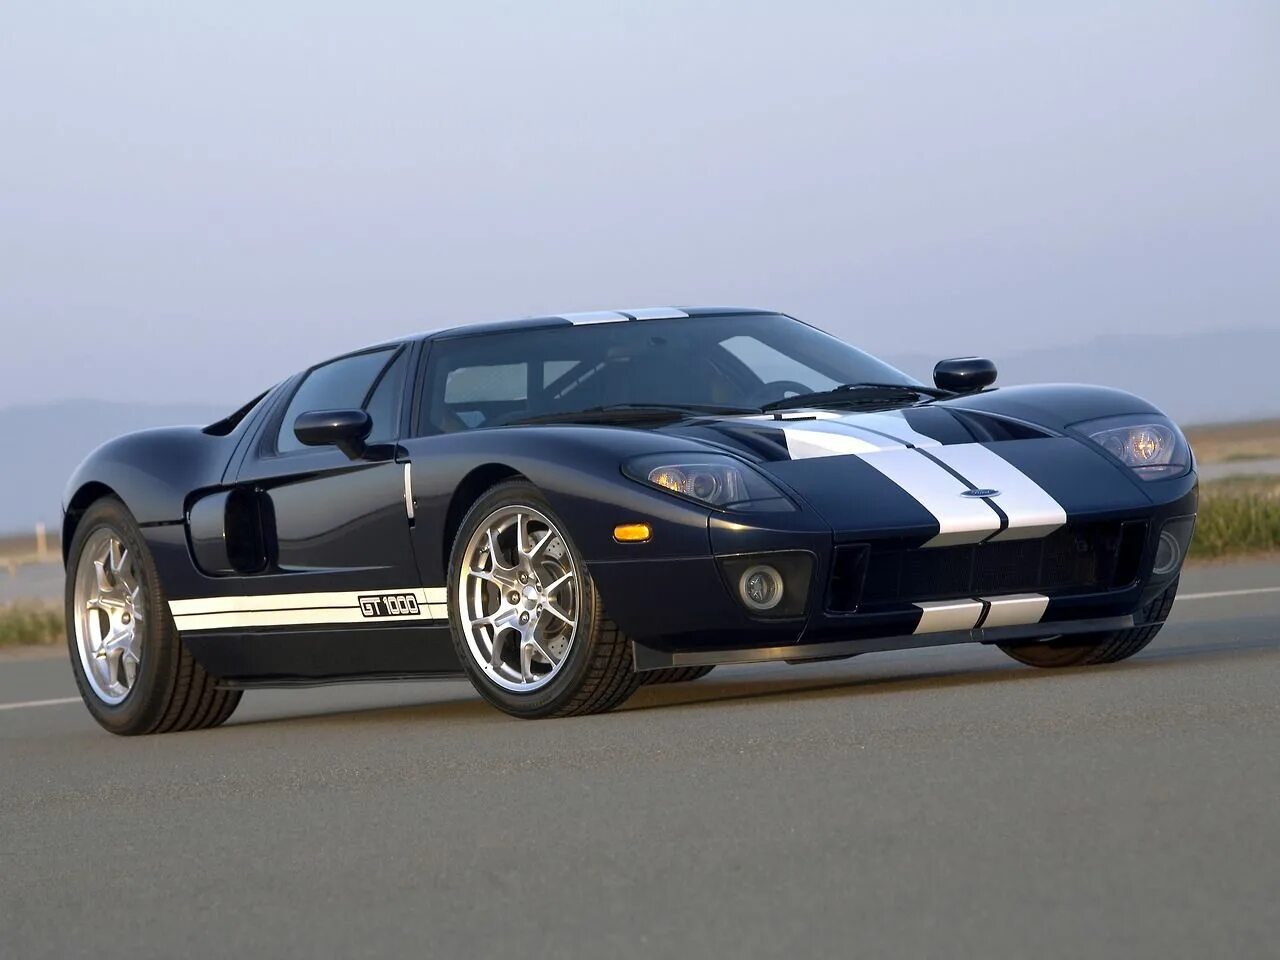 Ford gt 2007. Ford gt40 2007. Форд ГТ 2007. Форд ГТ 2005.